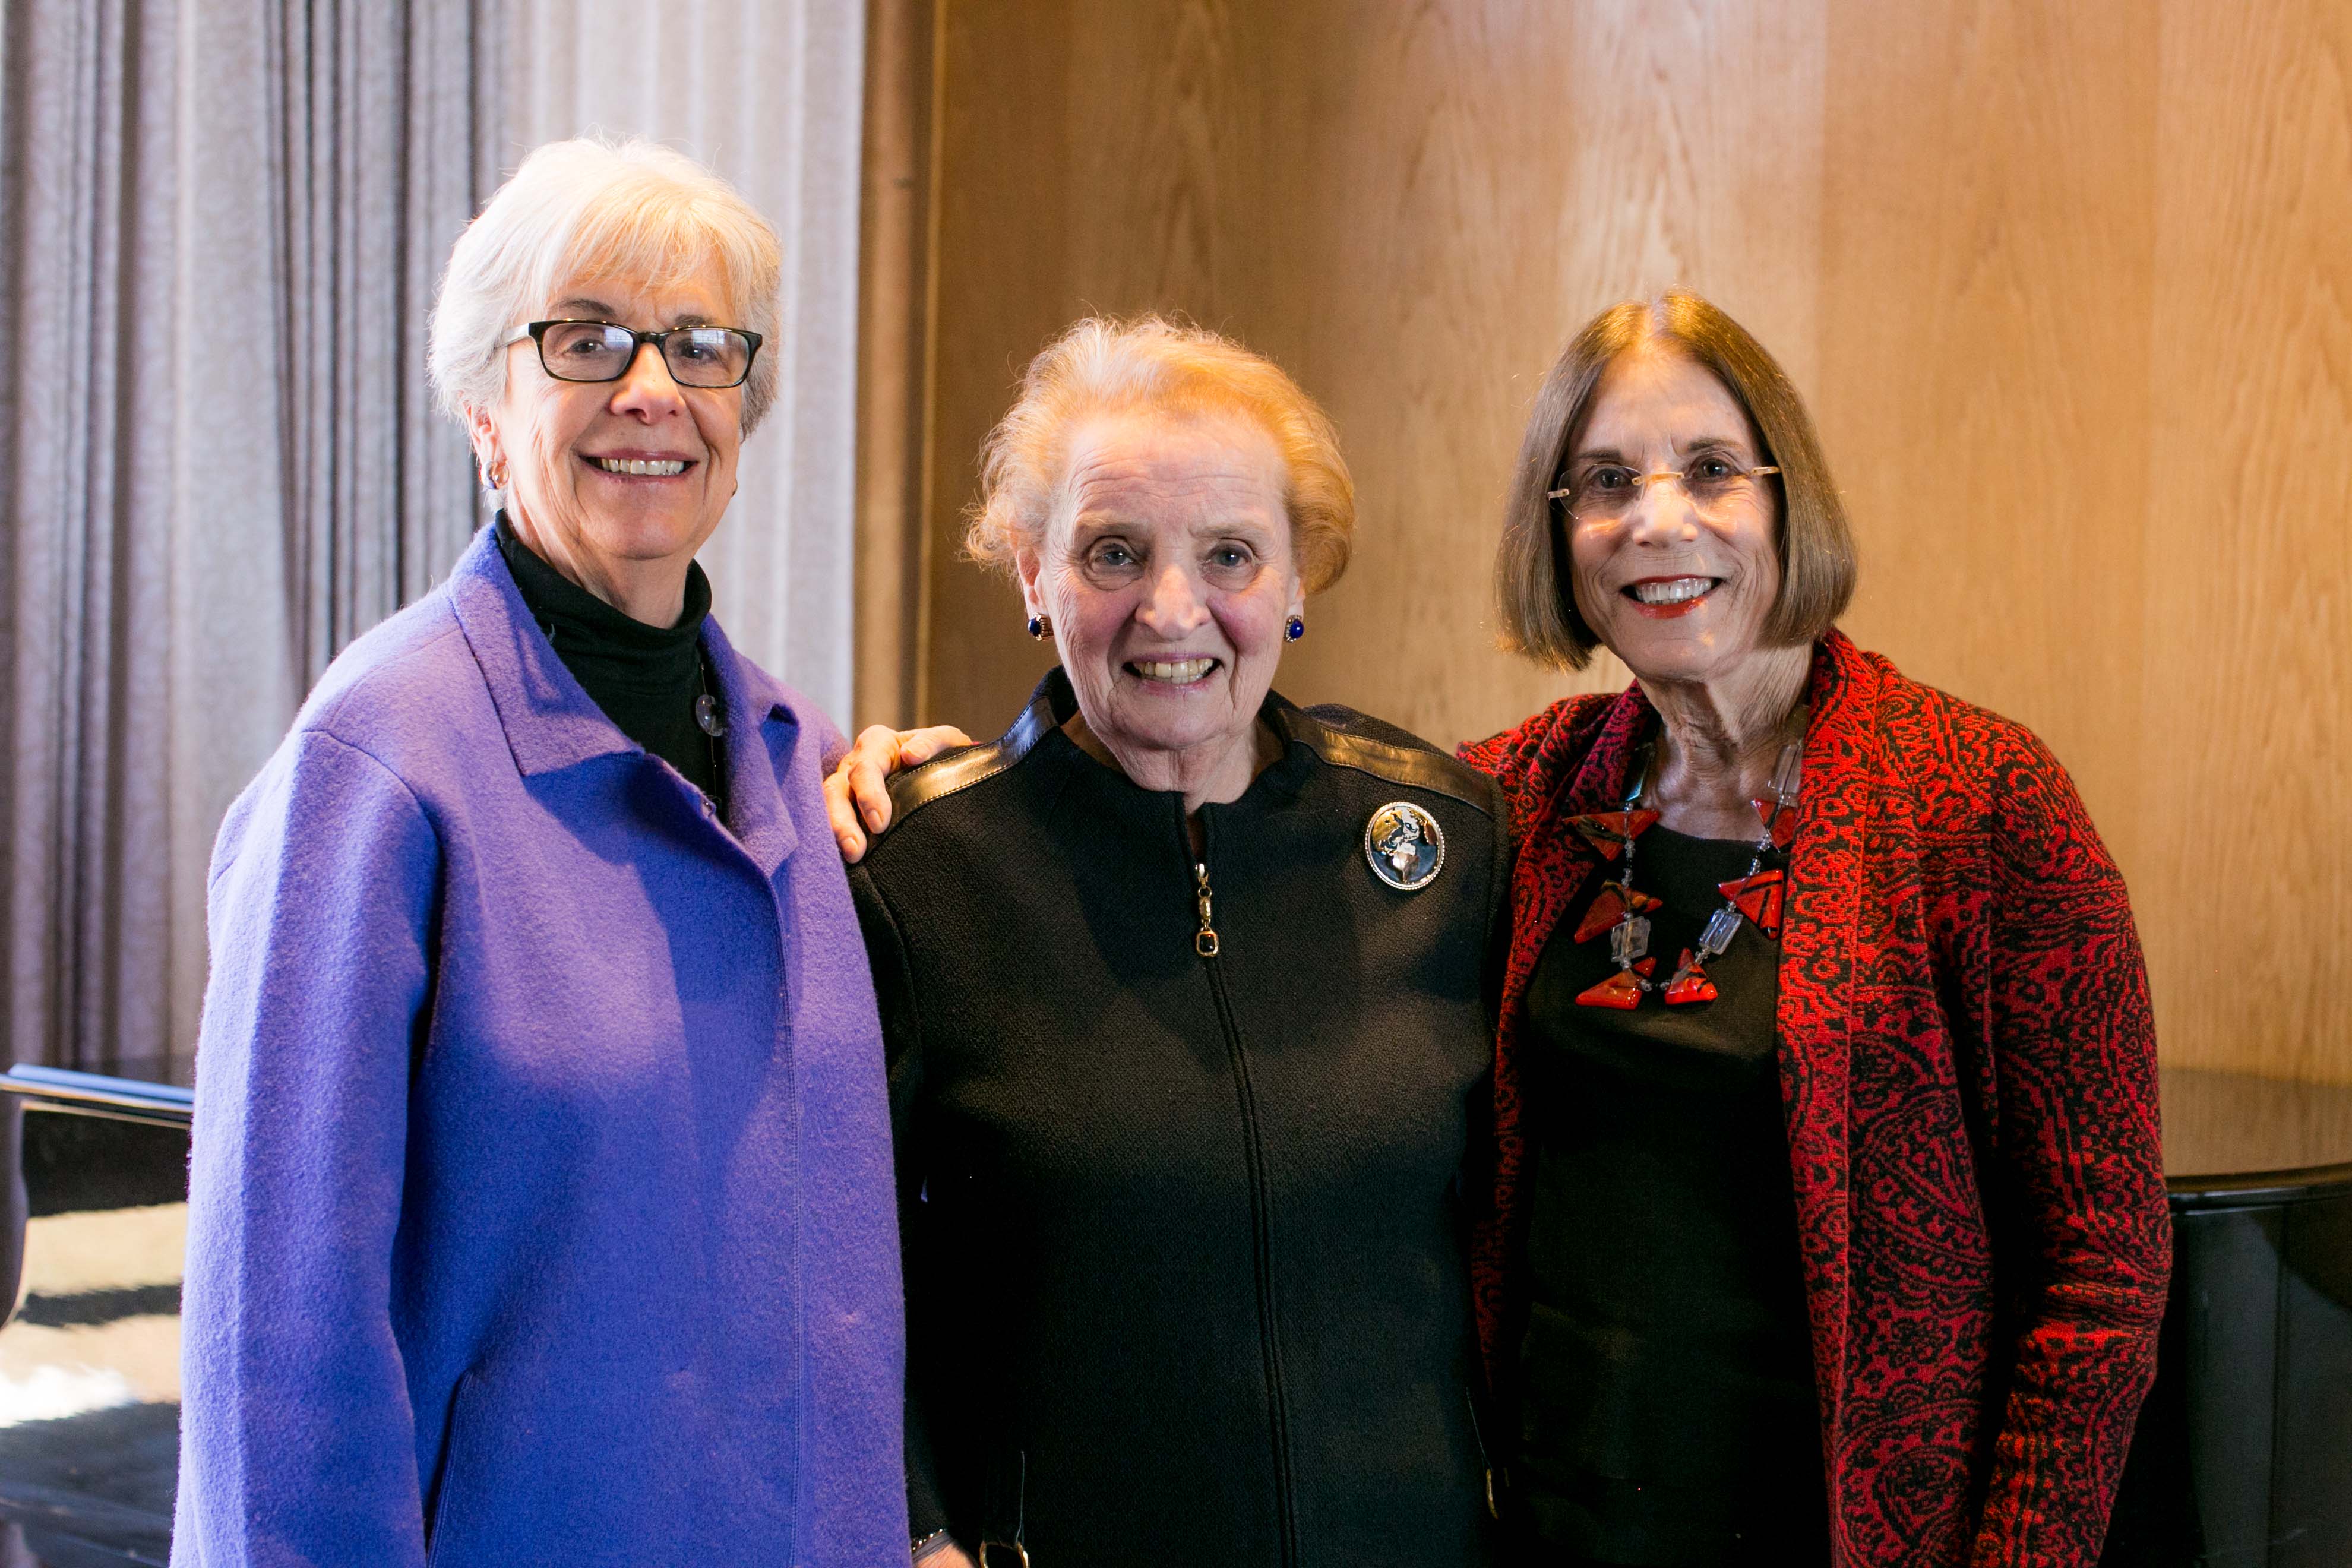 Wini Freund, Madeleine Albright (middle), and Susan Terris at Wellesley College in January 2016; courtesy Wellesley College